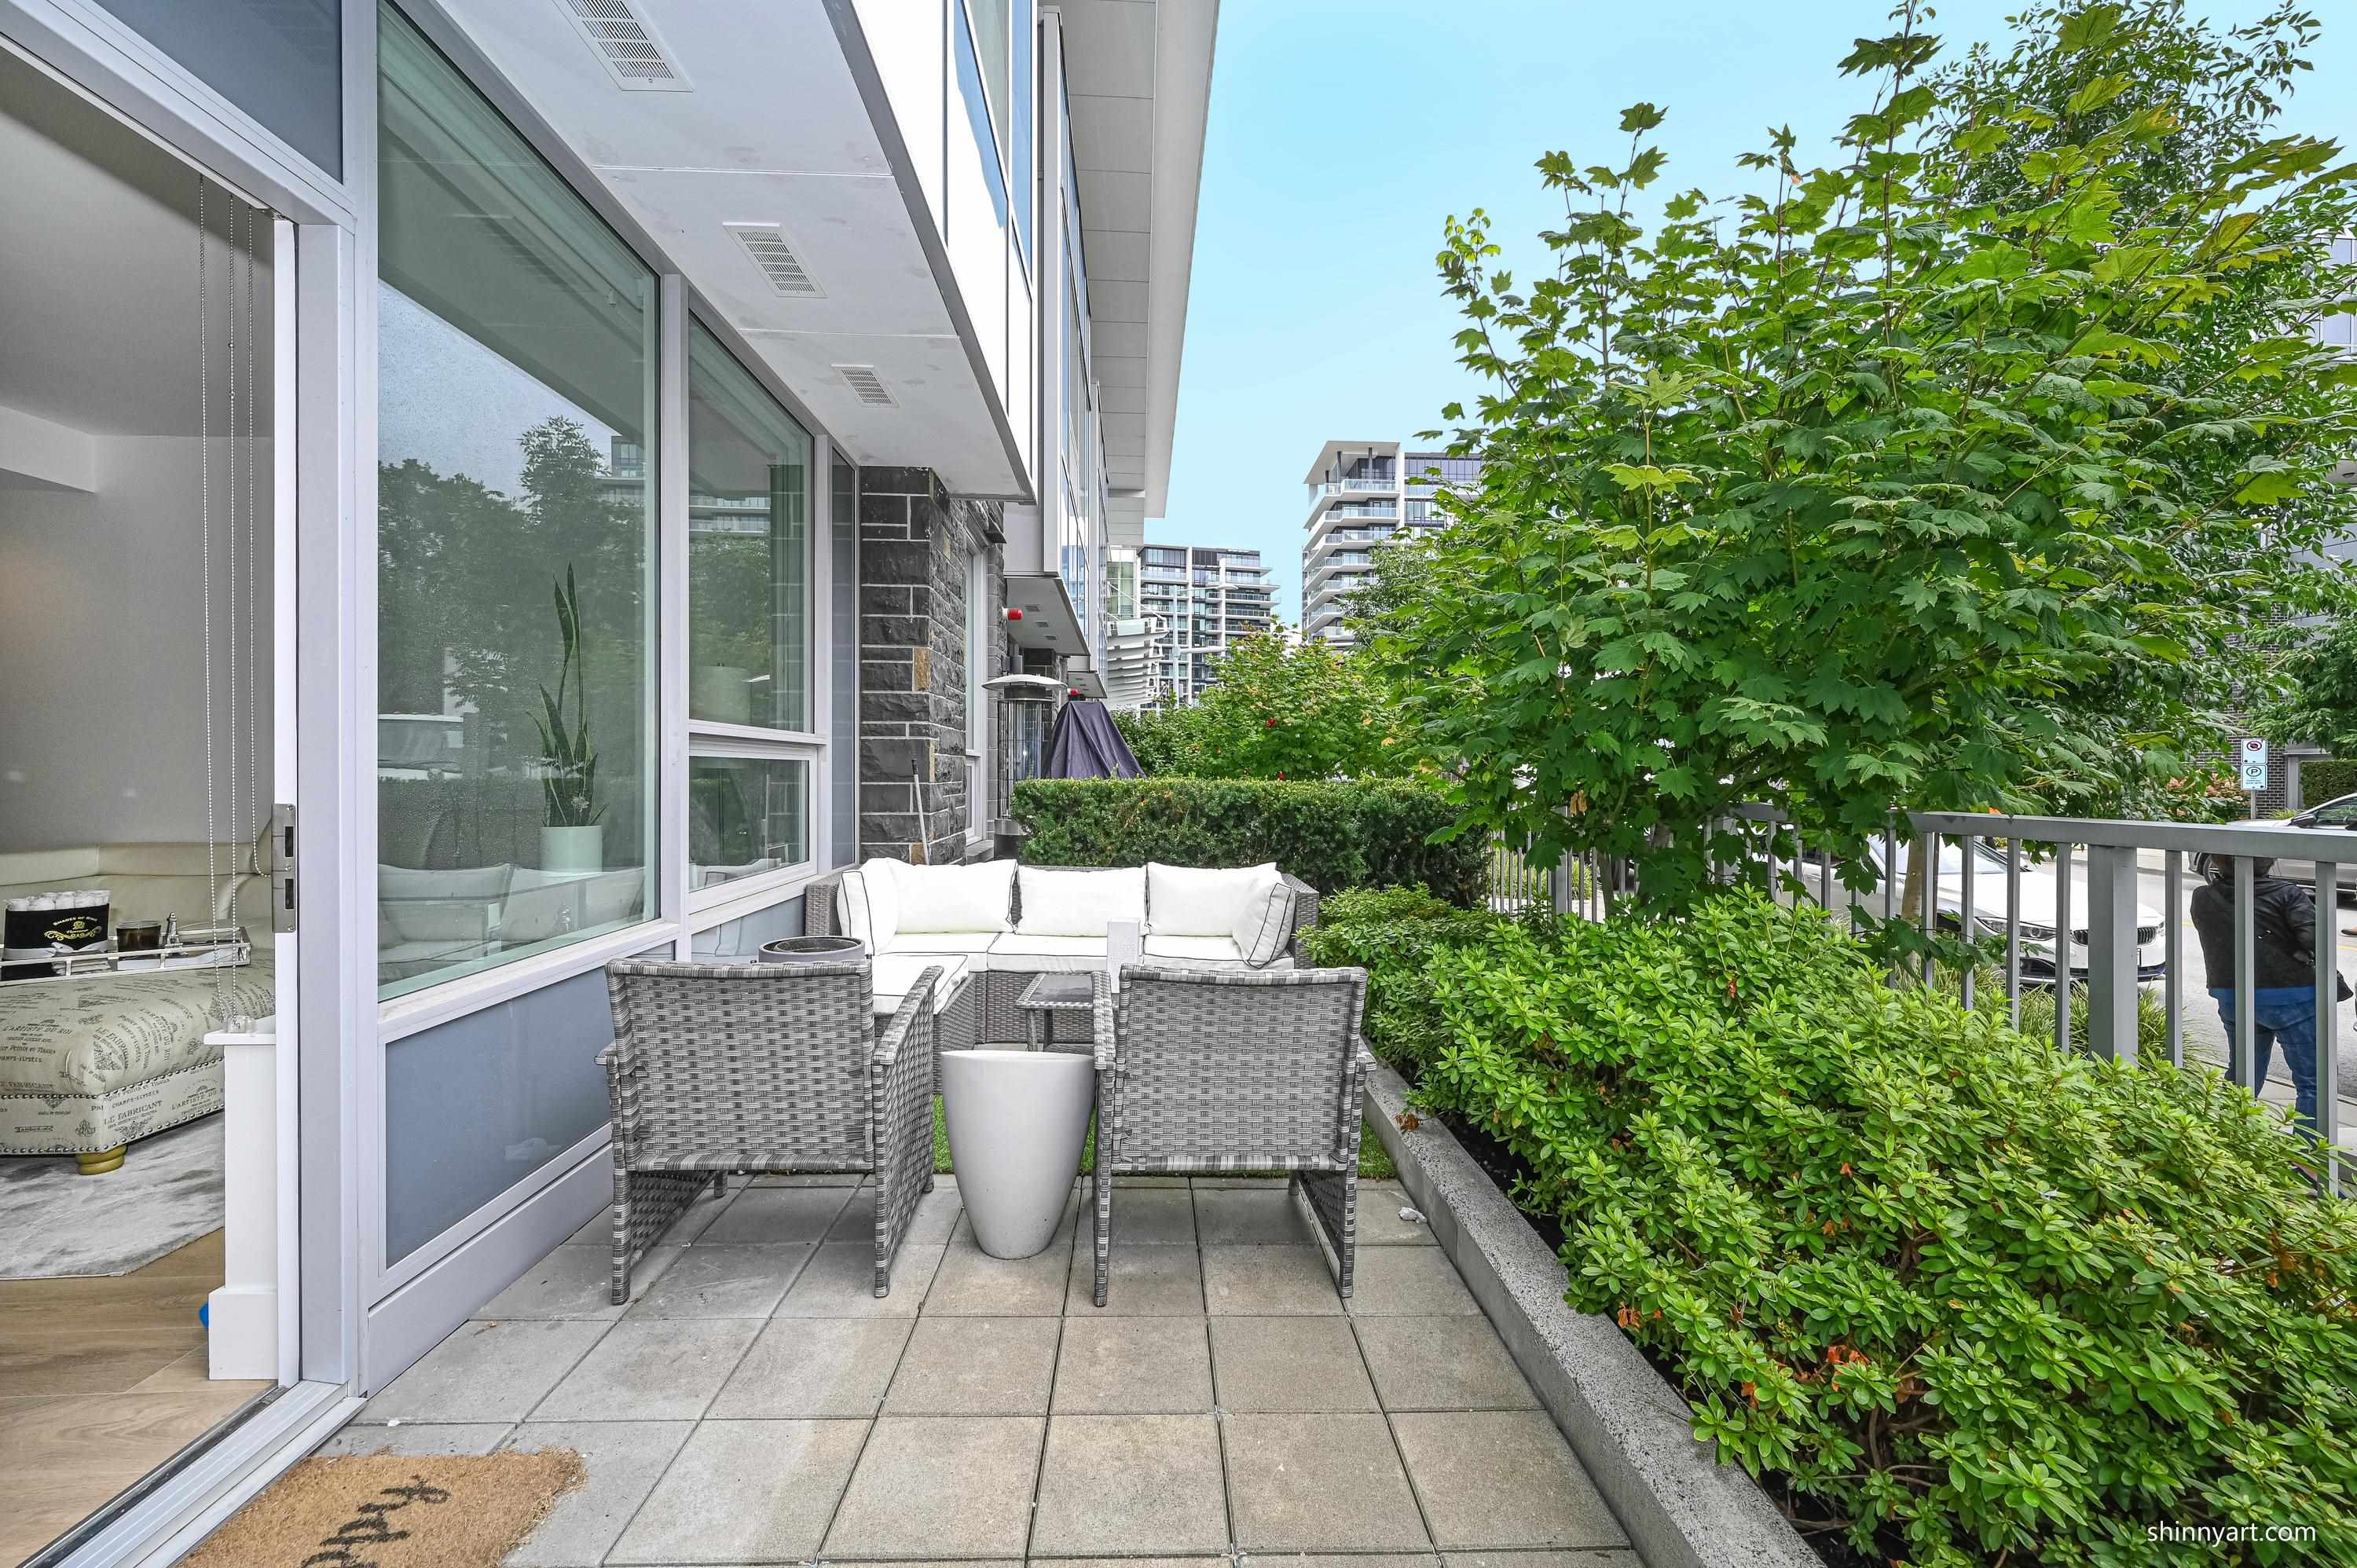 Listing image of Th3 6900 PEARSON WAY